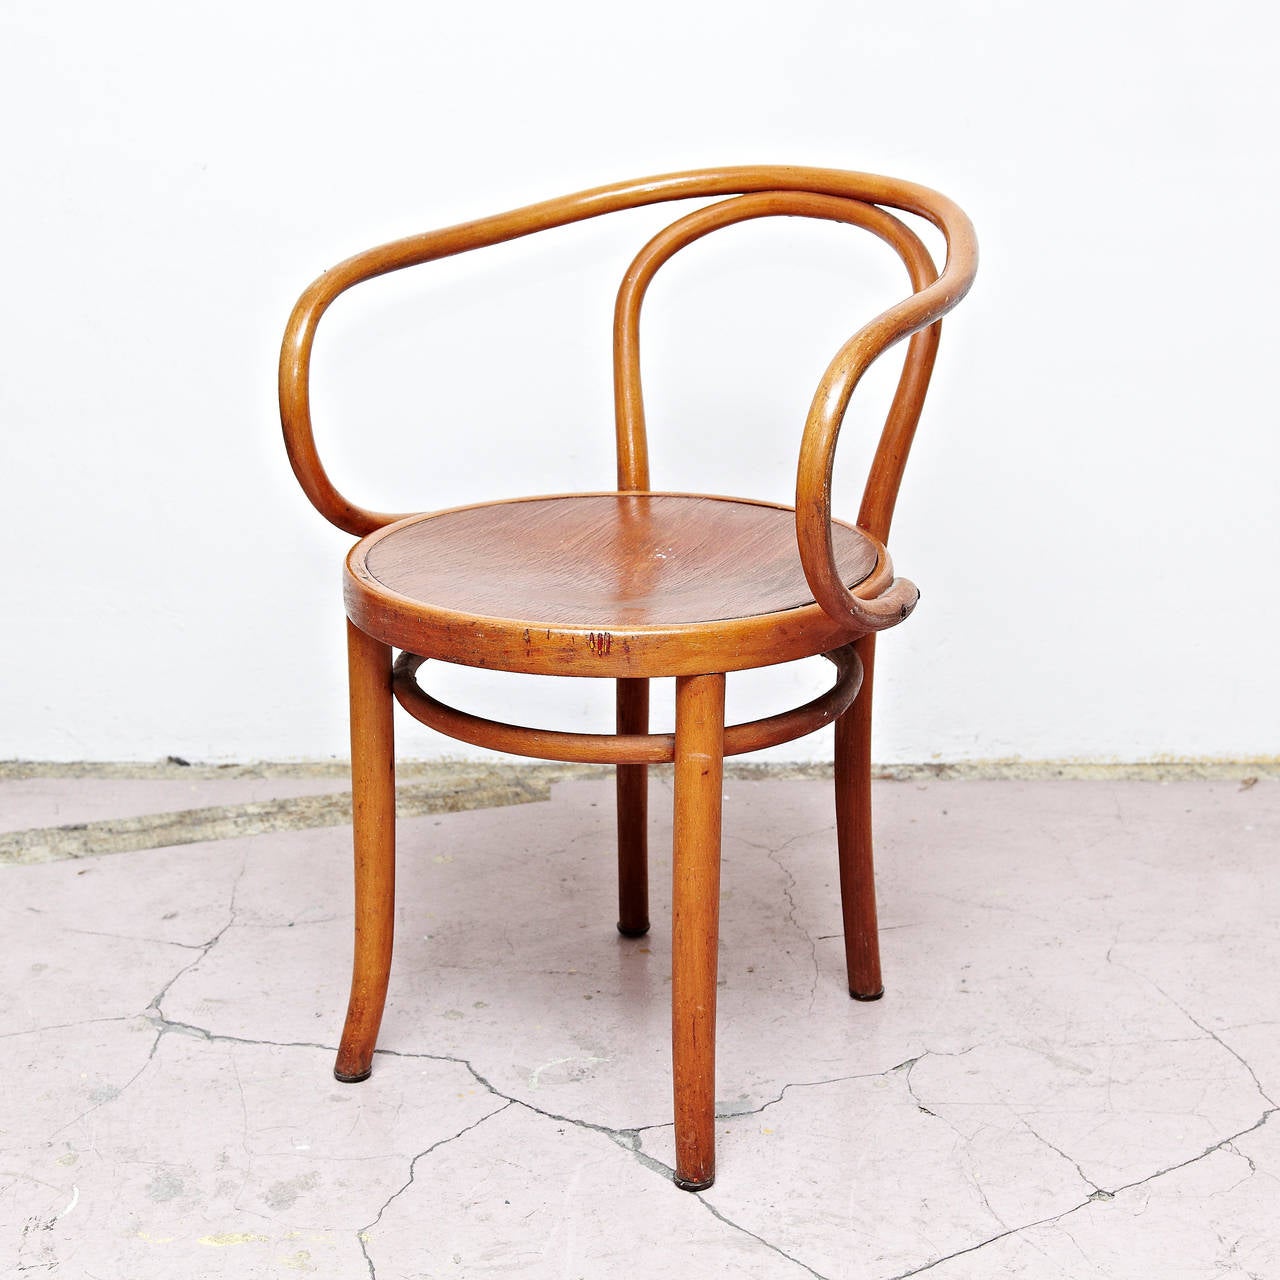 J.J. Kohn bentwood armchair, Austria

In great original condition, with minor wear consistent with age and use, preserving a beautiful patina.

Jacob & Josef Kohn, also known as J. & J. Kohn, was an Austrian furniture maker and interior designer